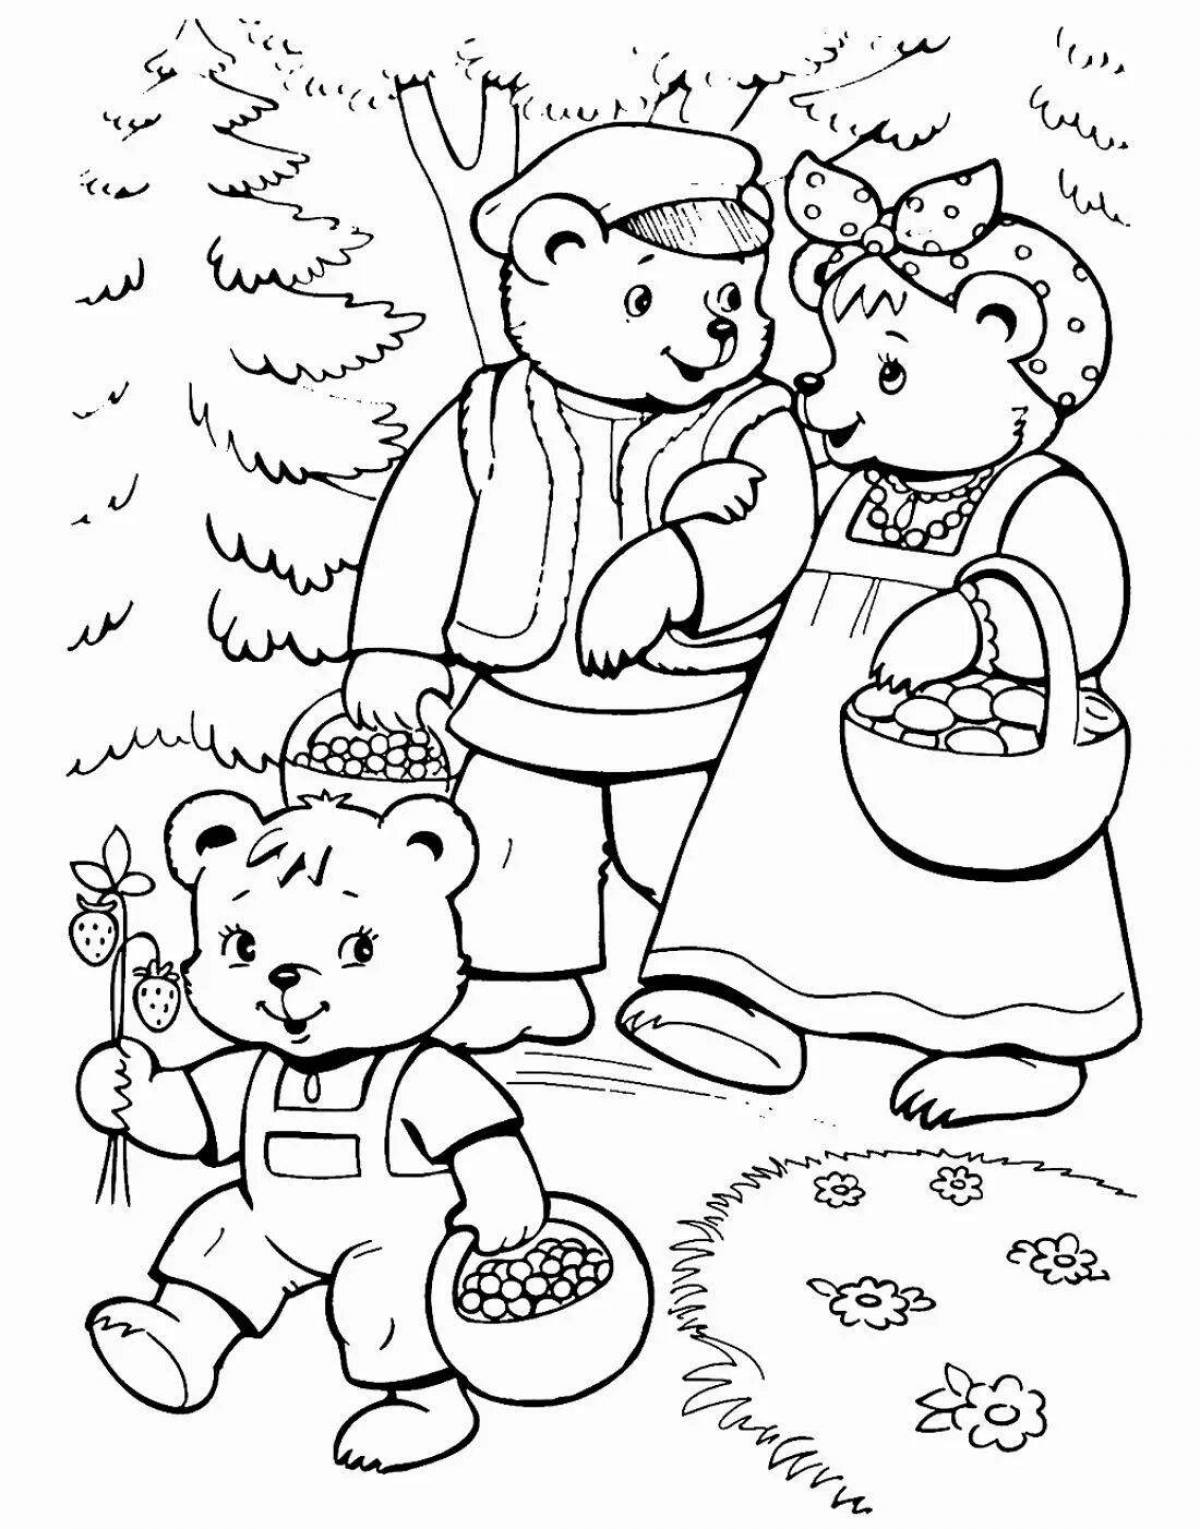 Exquisite fairy tale coloring book